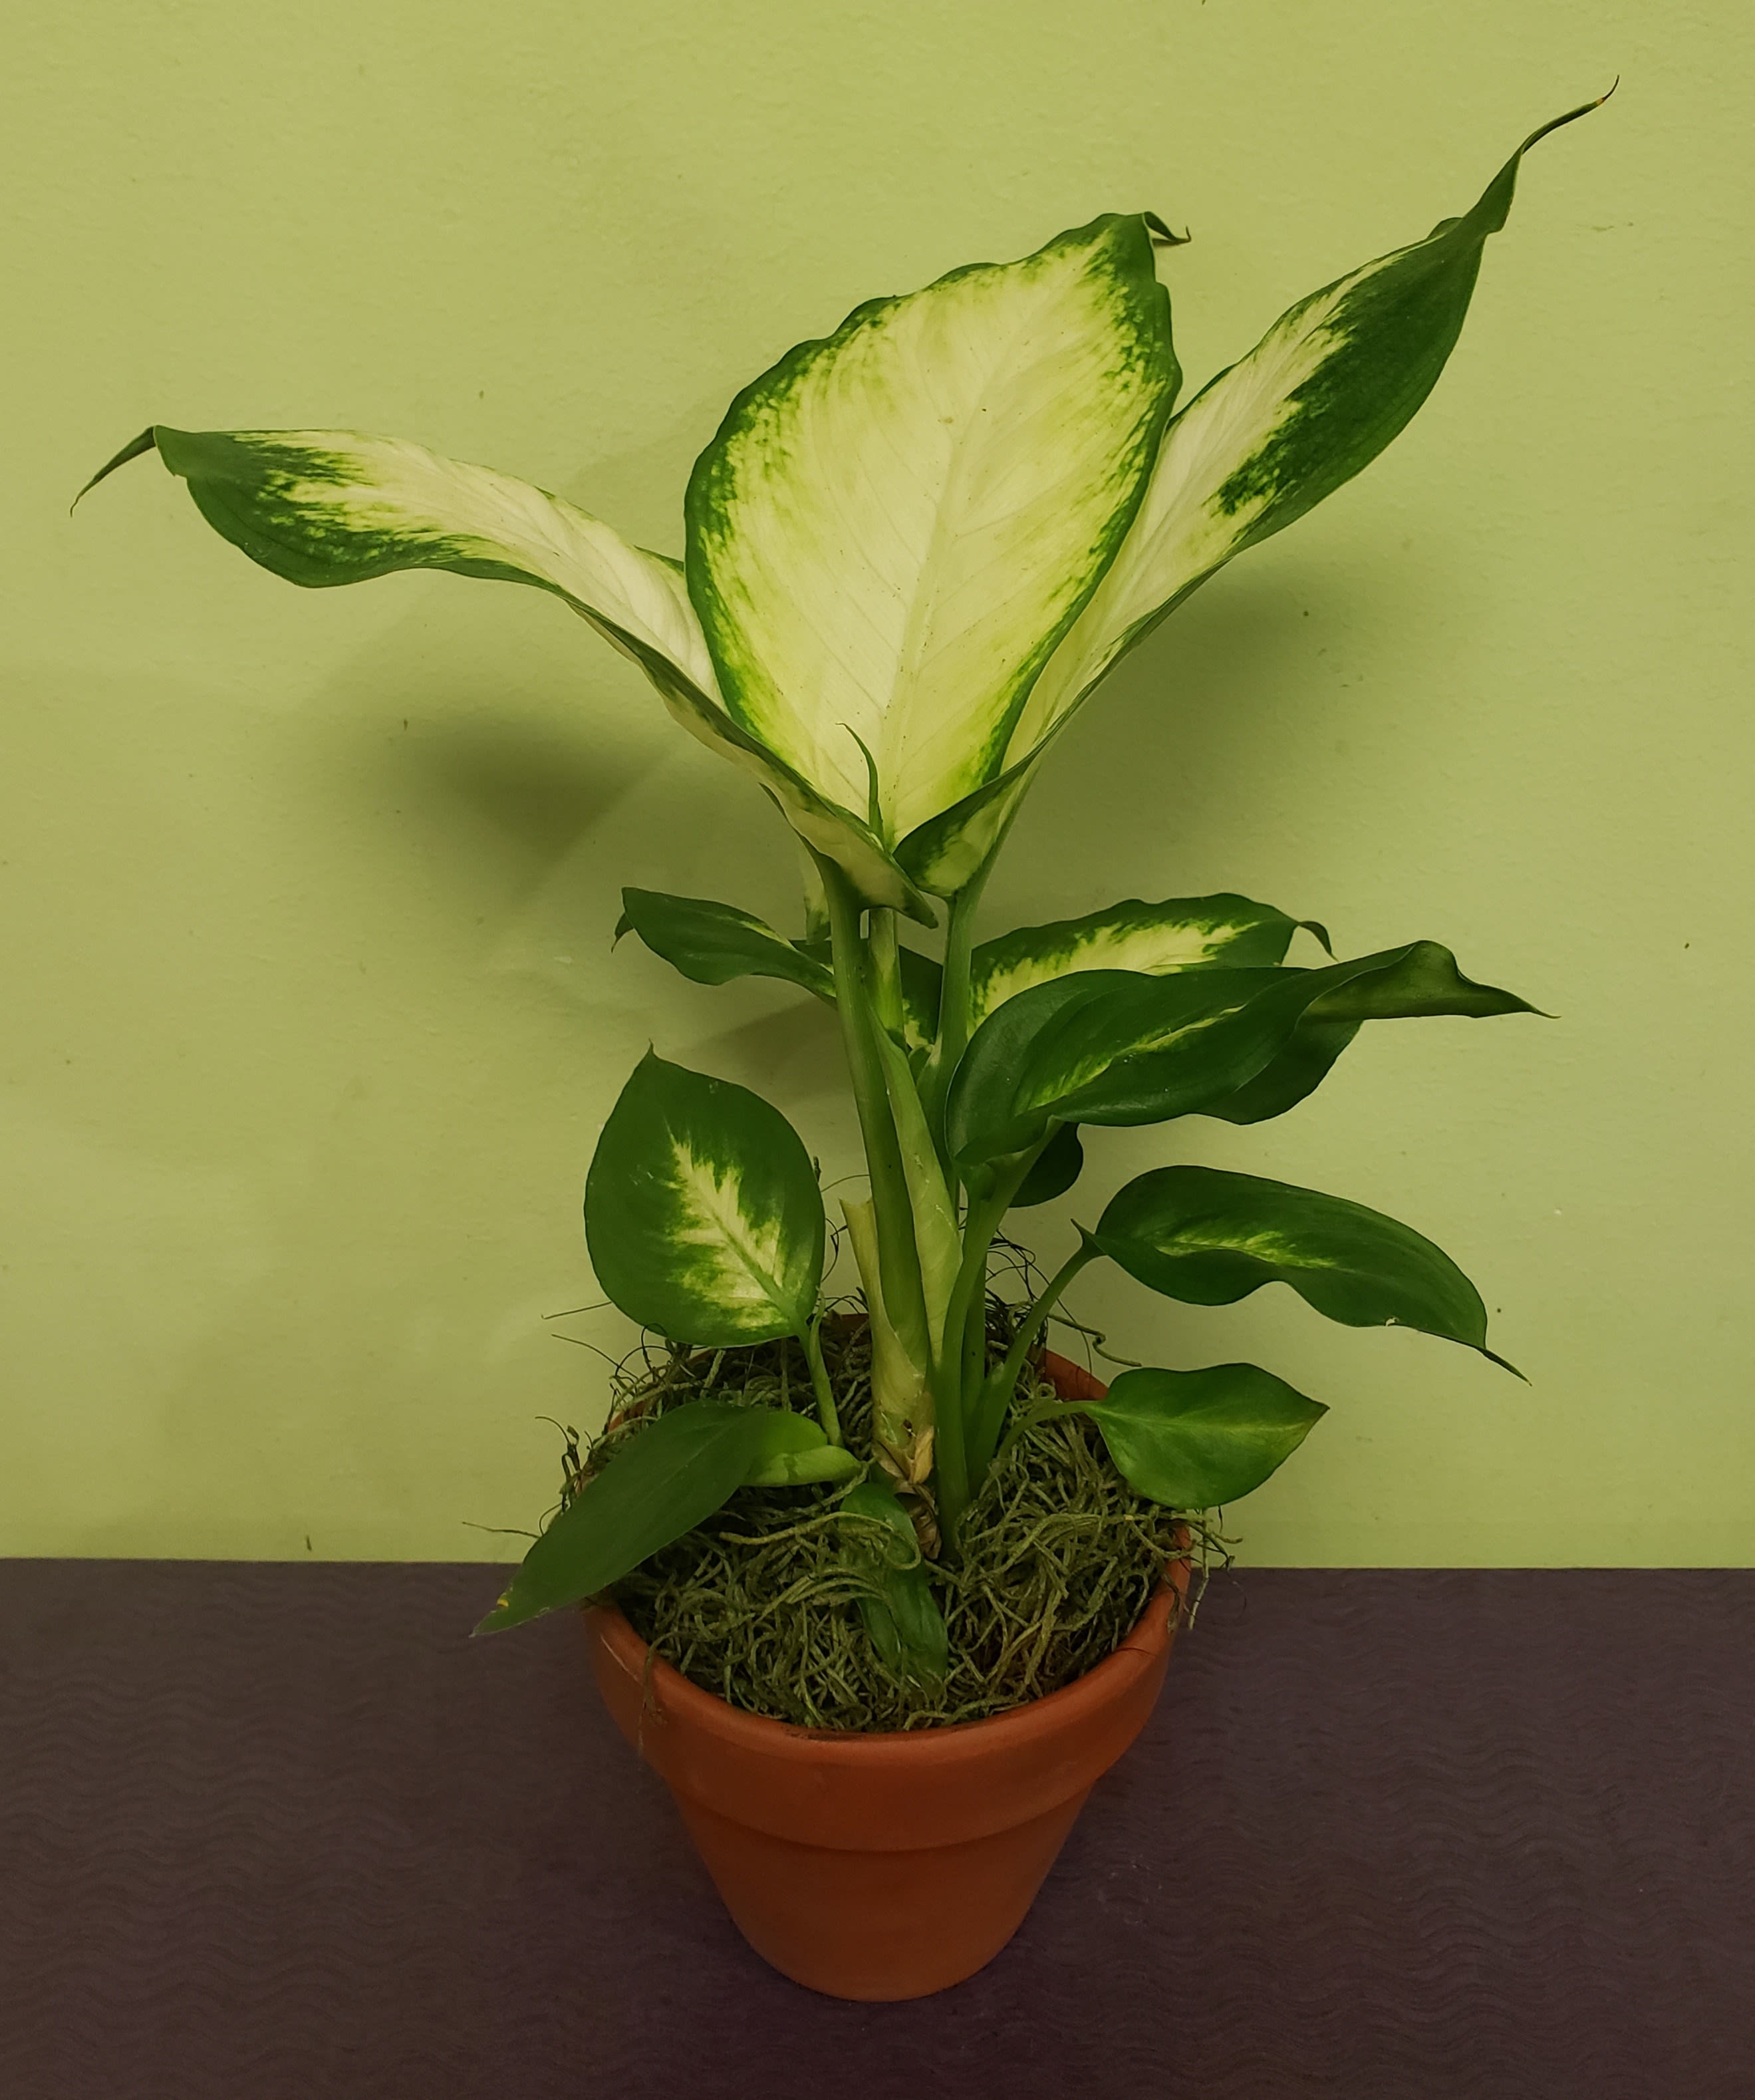 Dieffenbachia Plant - This is a great small desk plant that can grow into a large, showy, and colorful plant. Water lightly once a week. They might droop a bit if you don’t water so be careful. They will perk up though. Filtered light is all they require. The plant is in a 4inch container a stands a bit under a foot tall. 